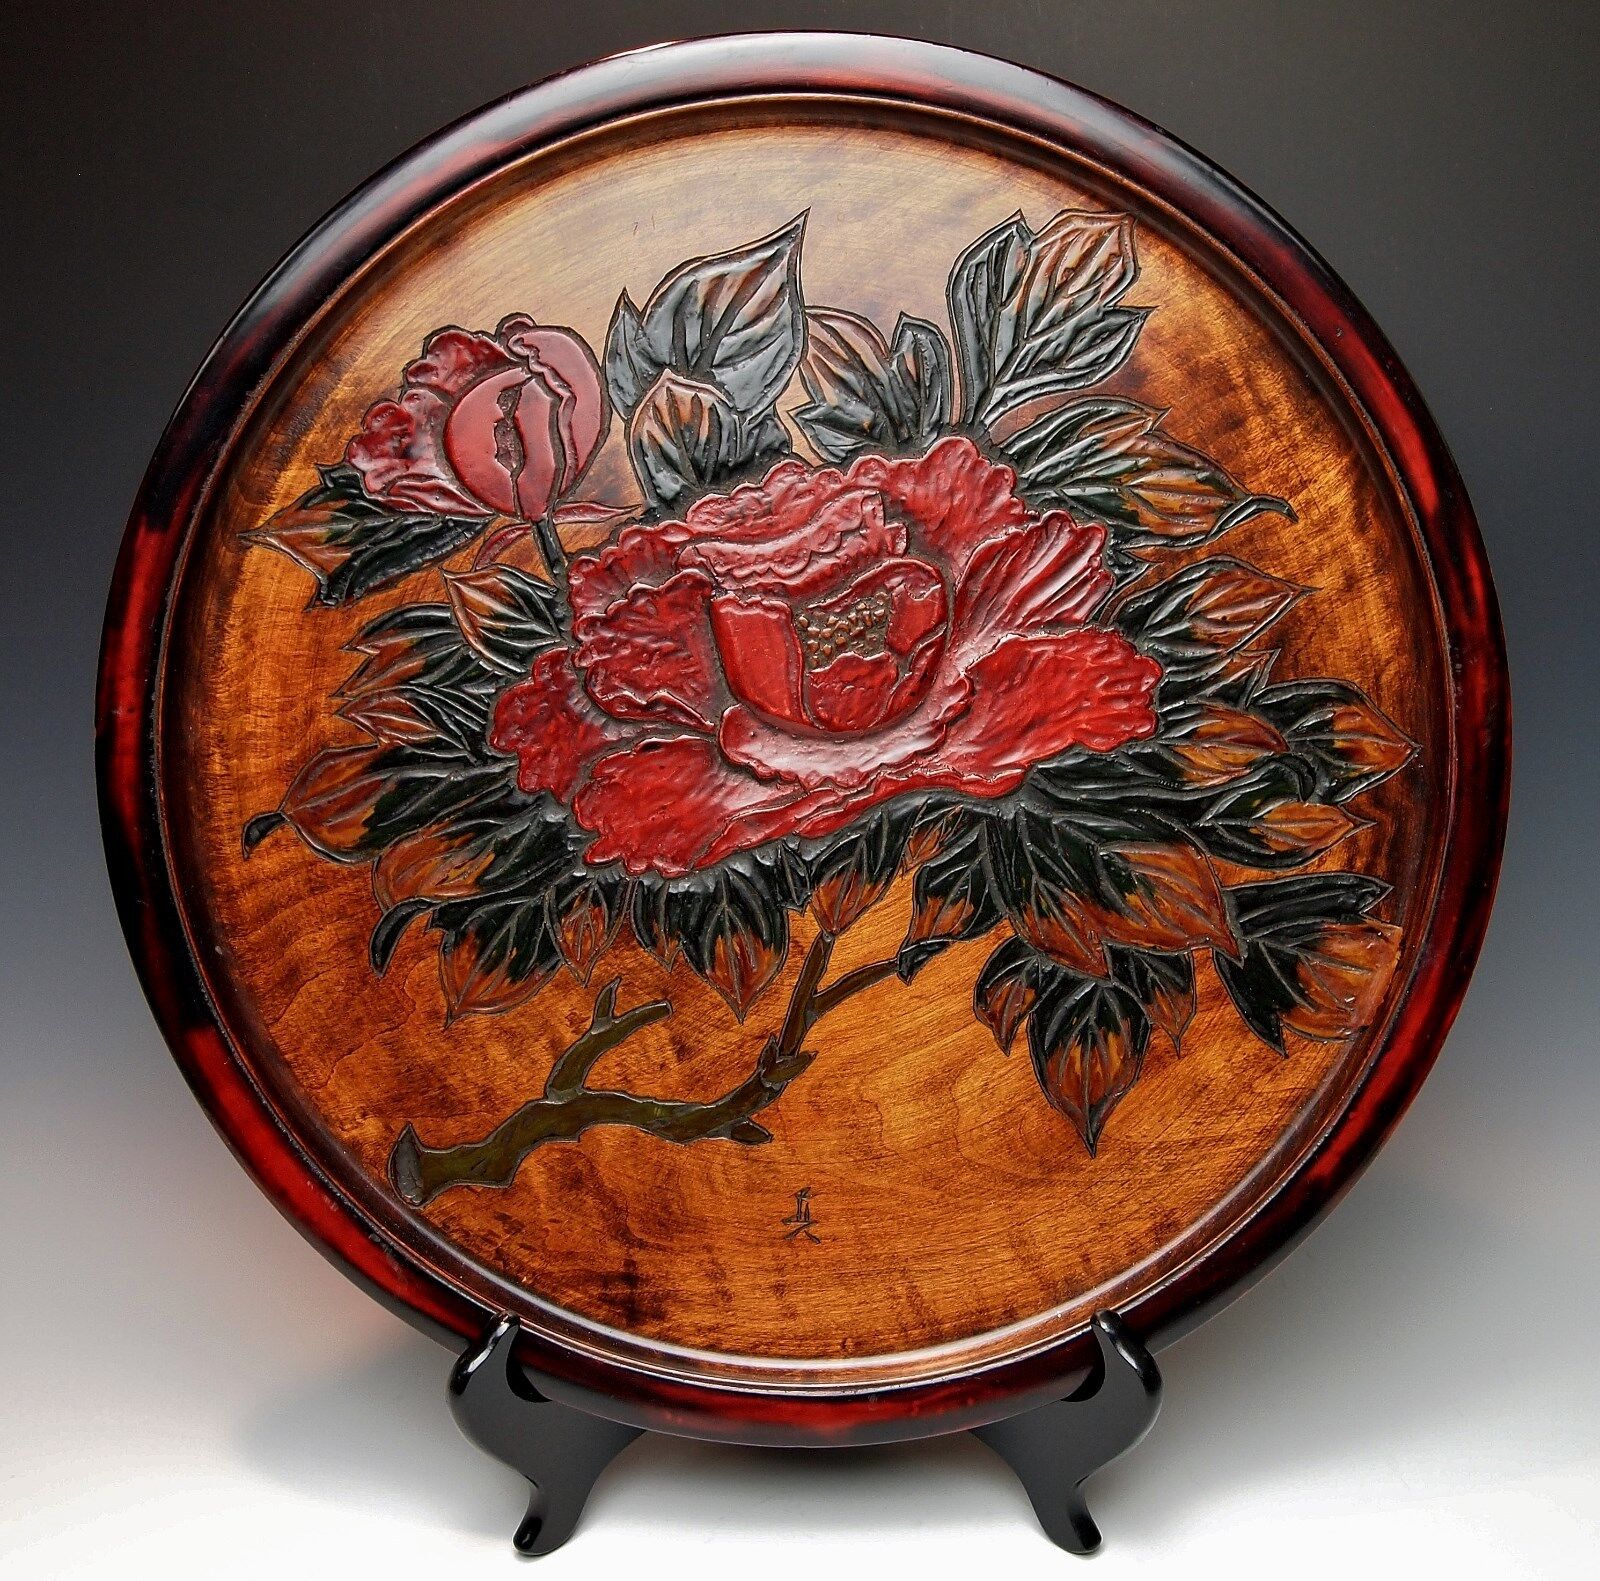 LARGE CARVED WOOD JAPANESE 16.5 INCH DISPLAY PLATE Hand Crafted Red Peony Signed